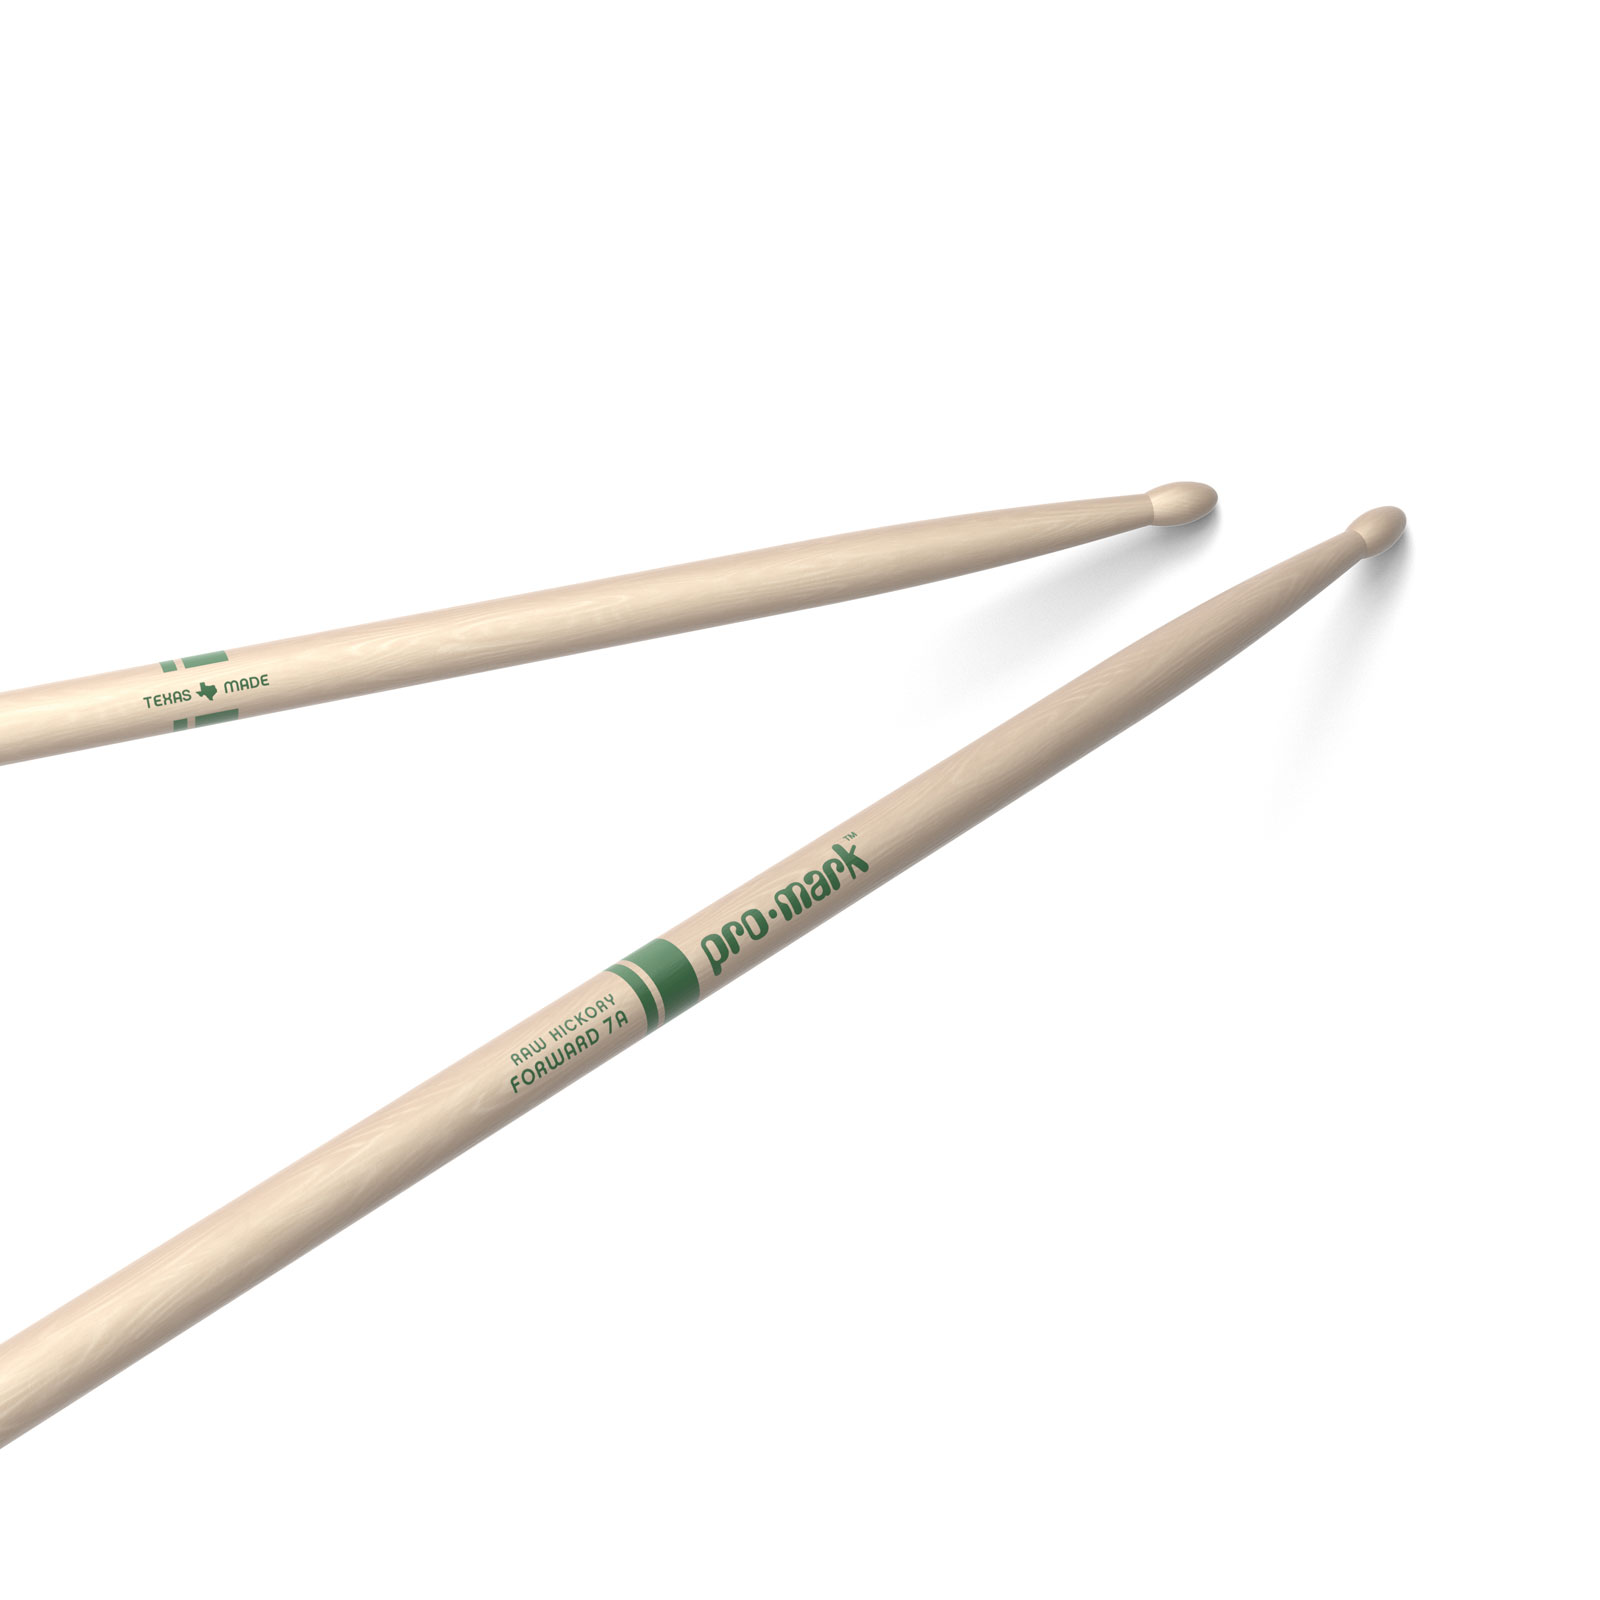 PRO MARK CLASSIC FORWARD 7A RAW HICKORY DRUMSTICK OVAL WOOD TIP